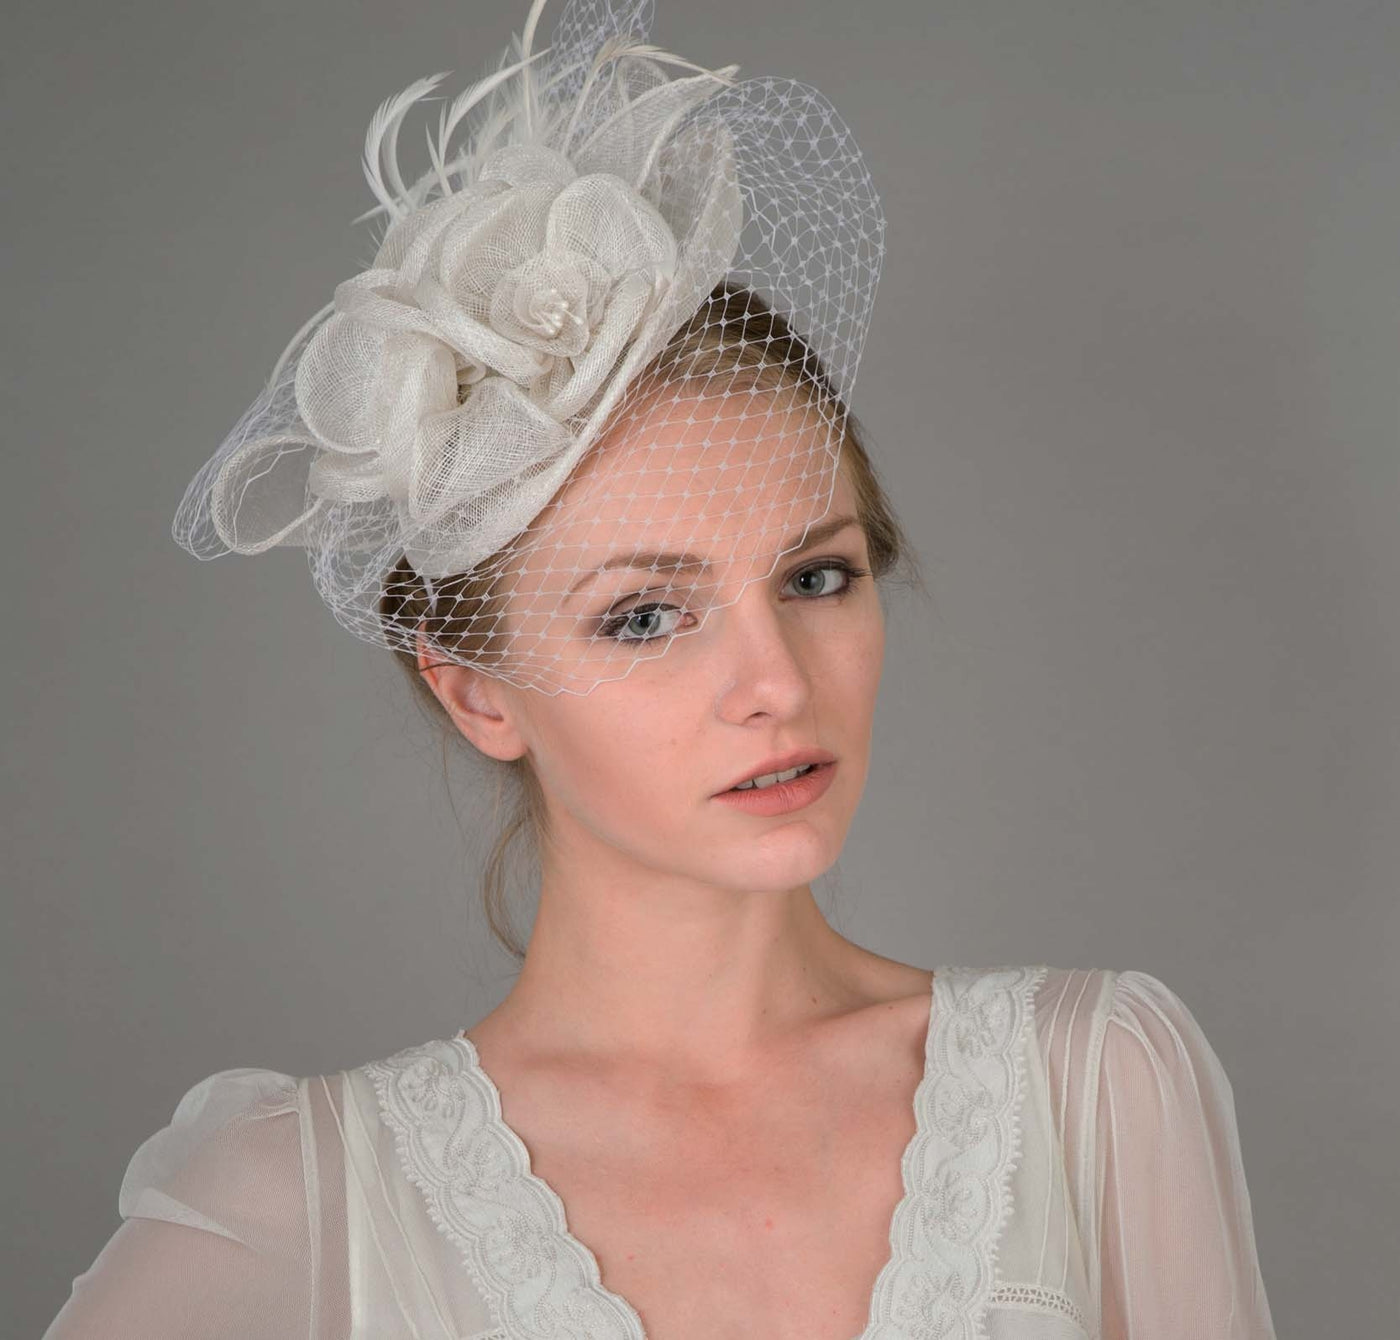 Peach Floral Sinamay Fascinator Headband in White - SOLD OUT